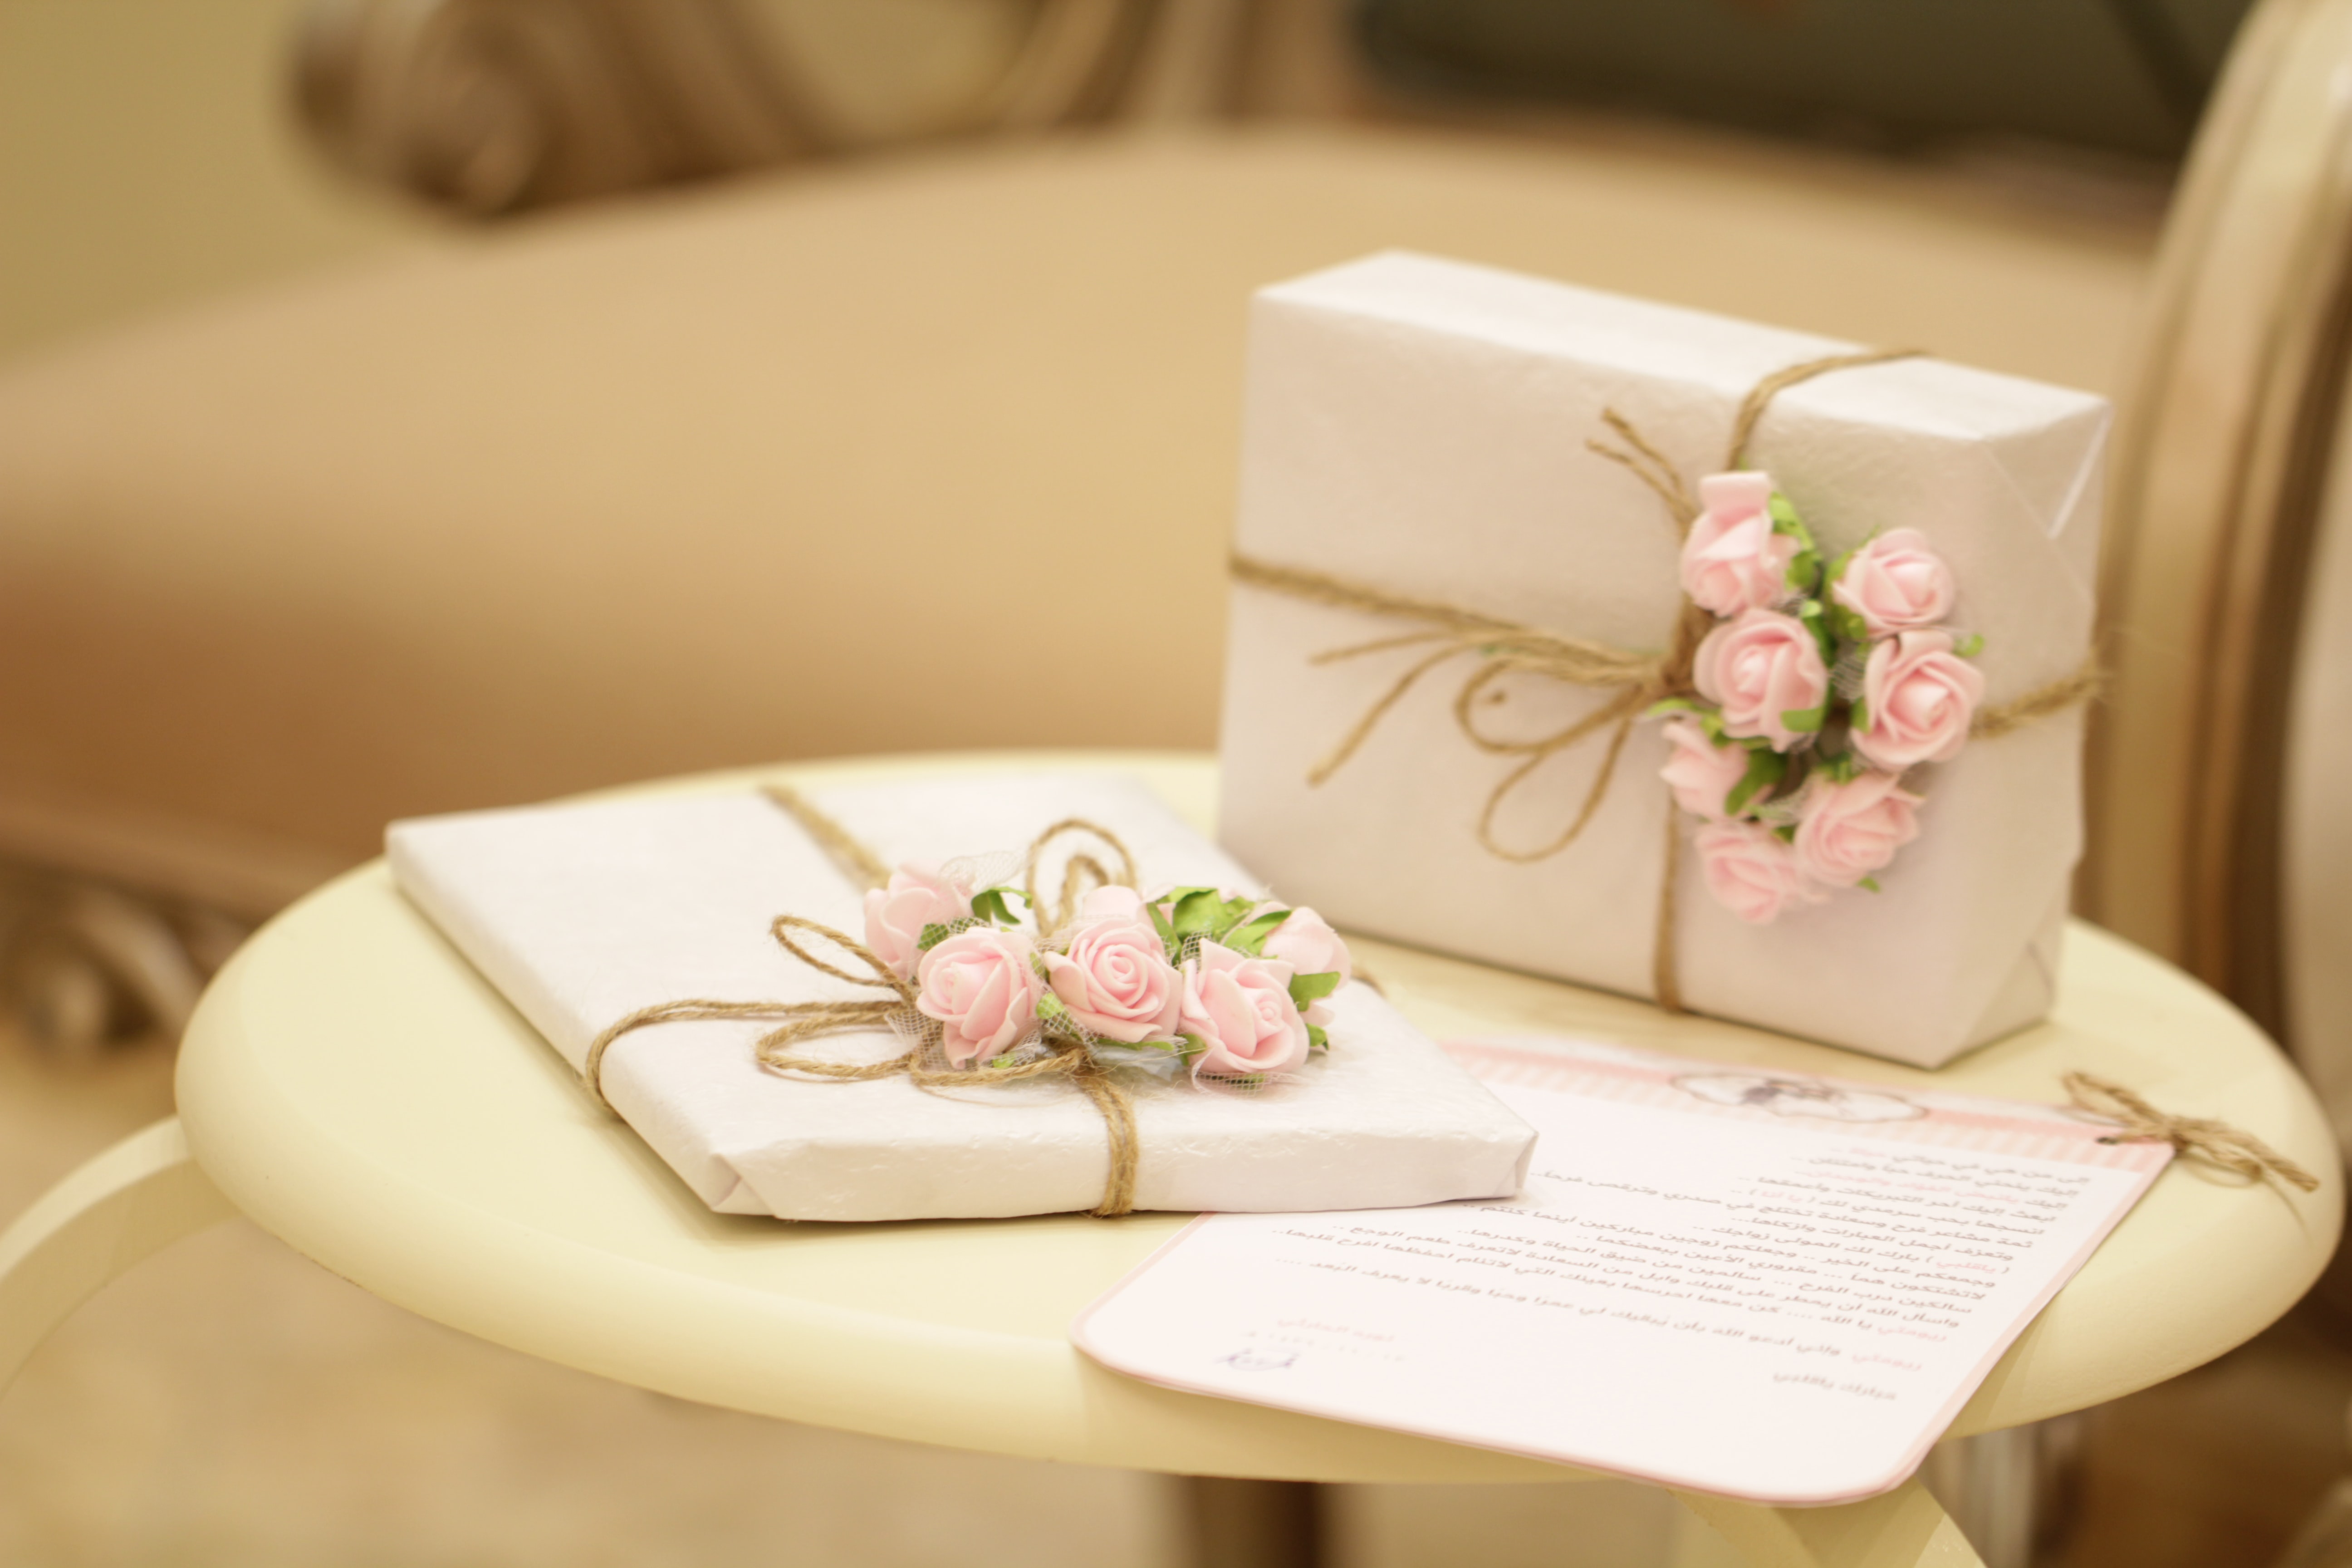 Promising Signs: Wedding Guests are in for an expensive year attending weddings. Image shows 2 gifts on a white table. Each gift is wrapped in white paper and tied with string and pink roses.